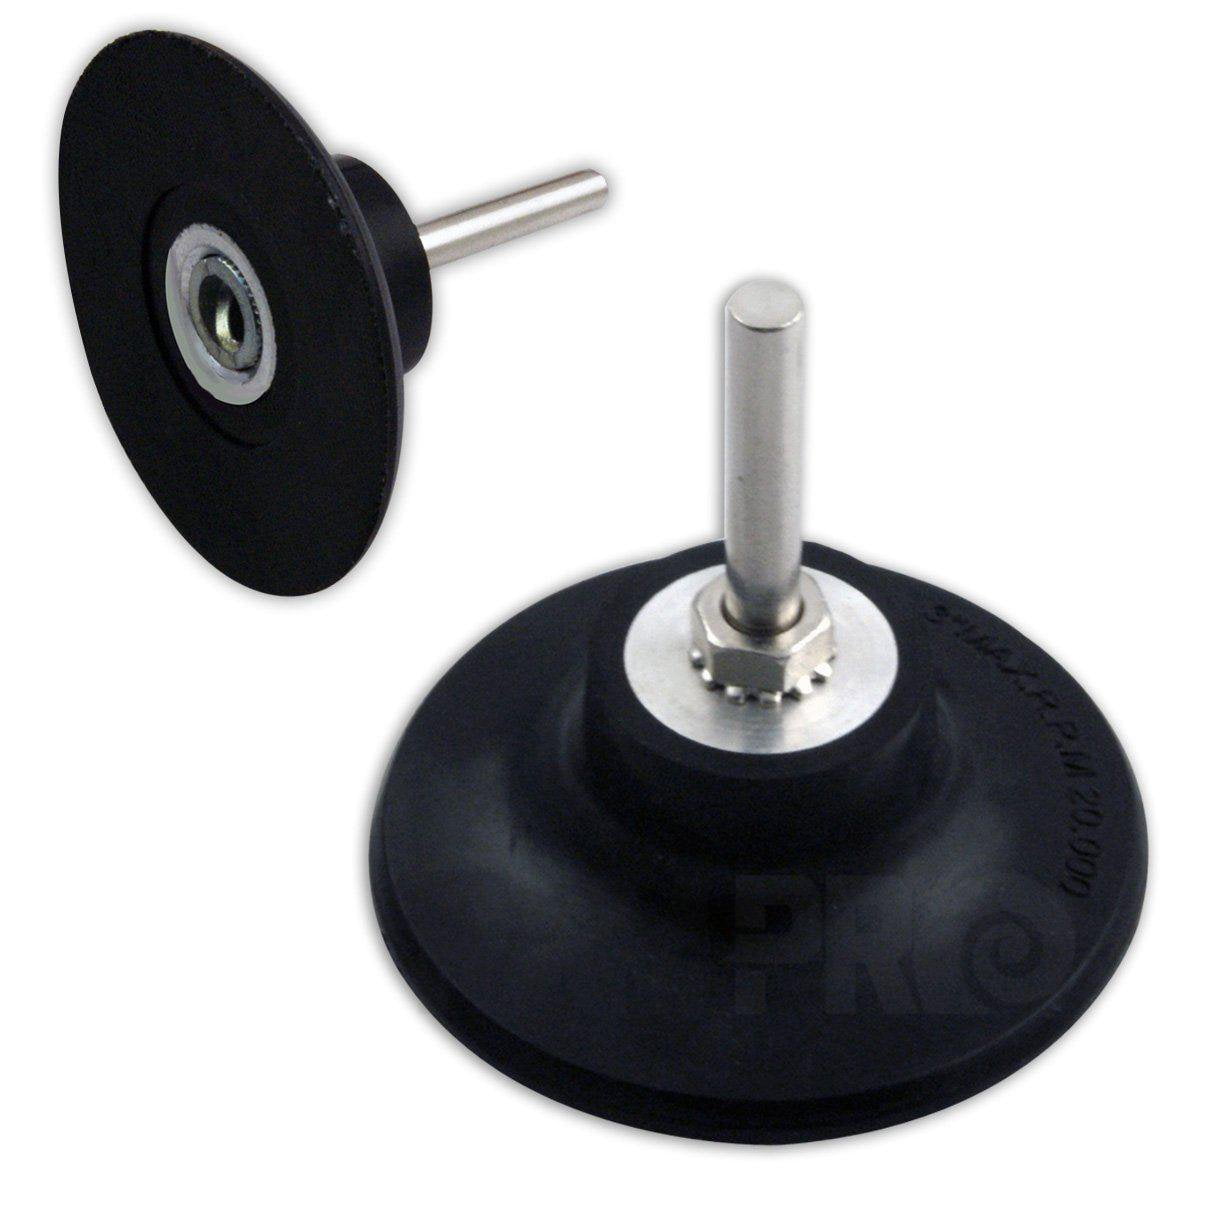 New 2" Sanding Discs Holder & 1/4'' Shank For  Rotary 3M Roloc Discs Pad 